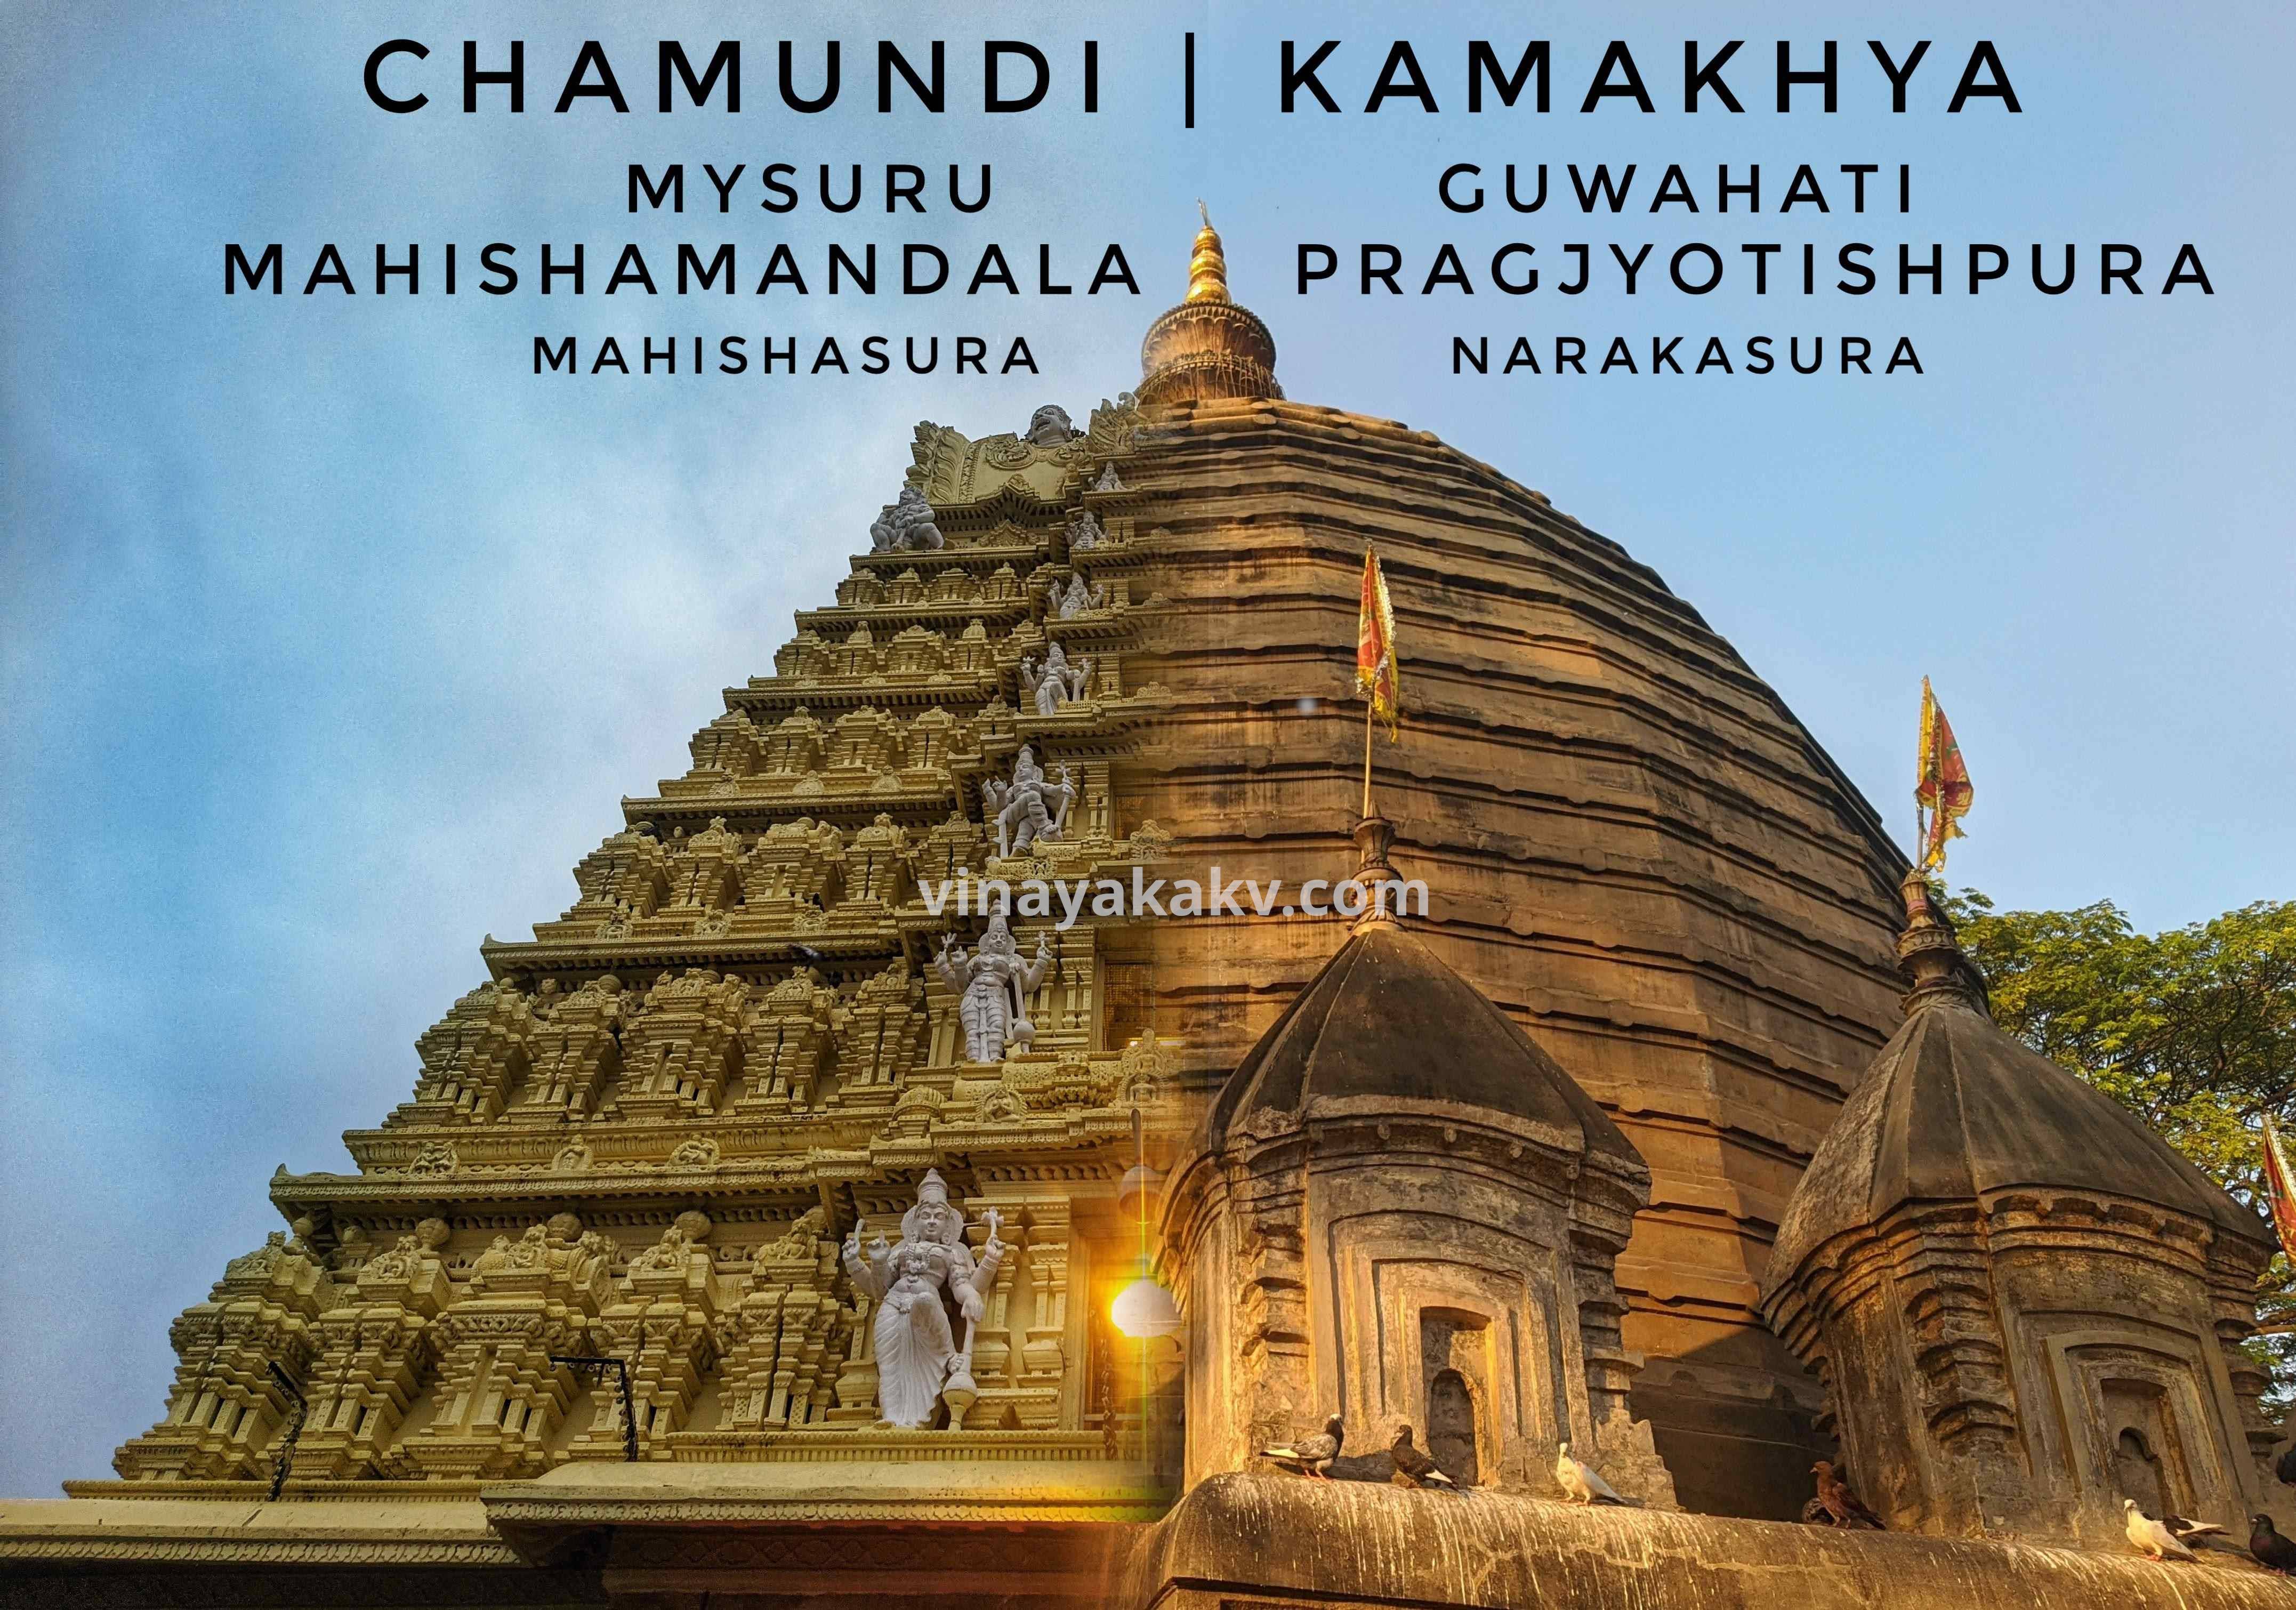 Rājagopuraṃ of Chamundi temple and Vimānaṃ of Kāmākhya temple, merged. Interestingly, they both are in the cities constructed by Asuras - Mahiṣa and Naraka, respectively.